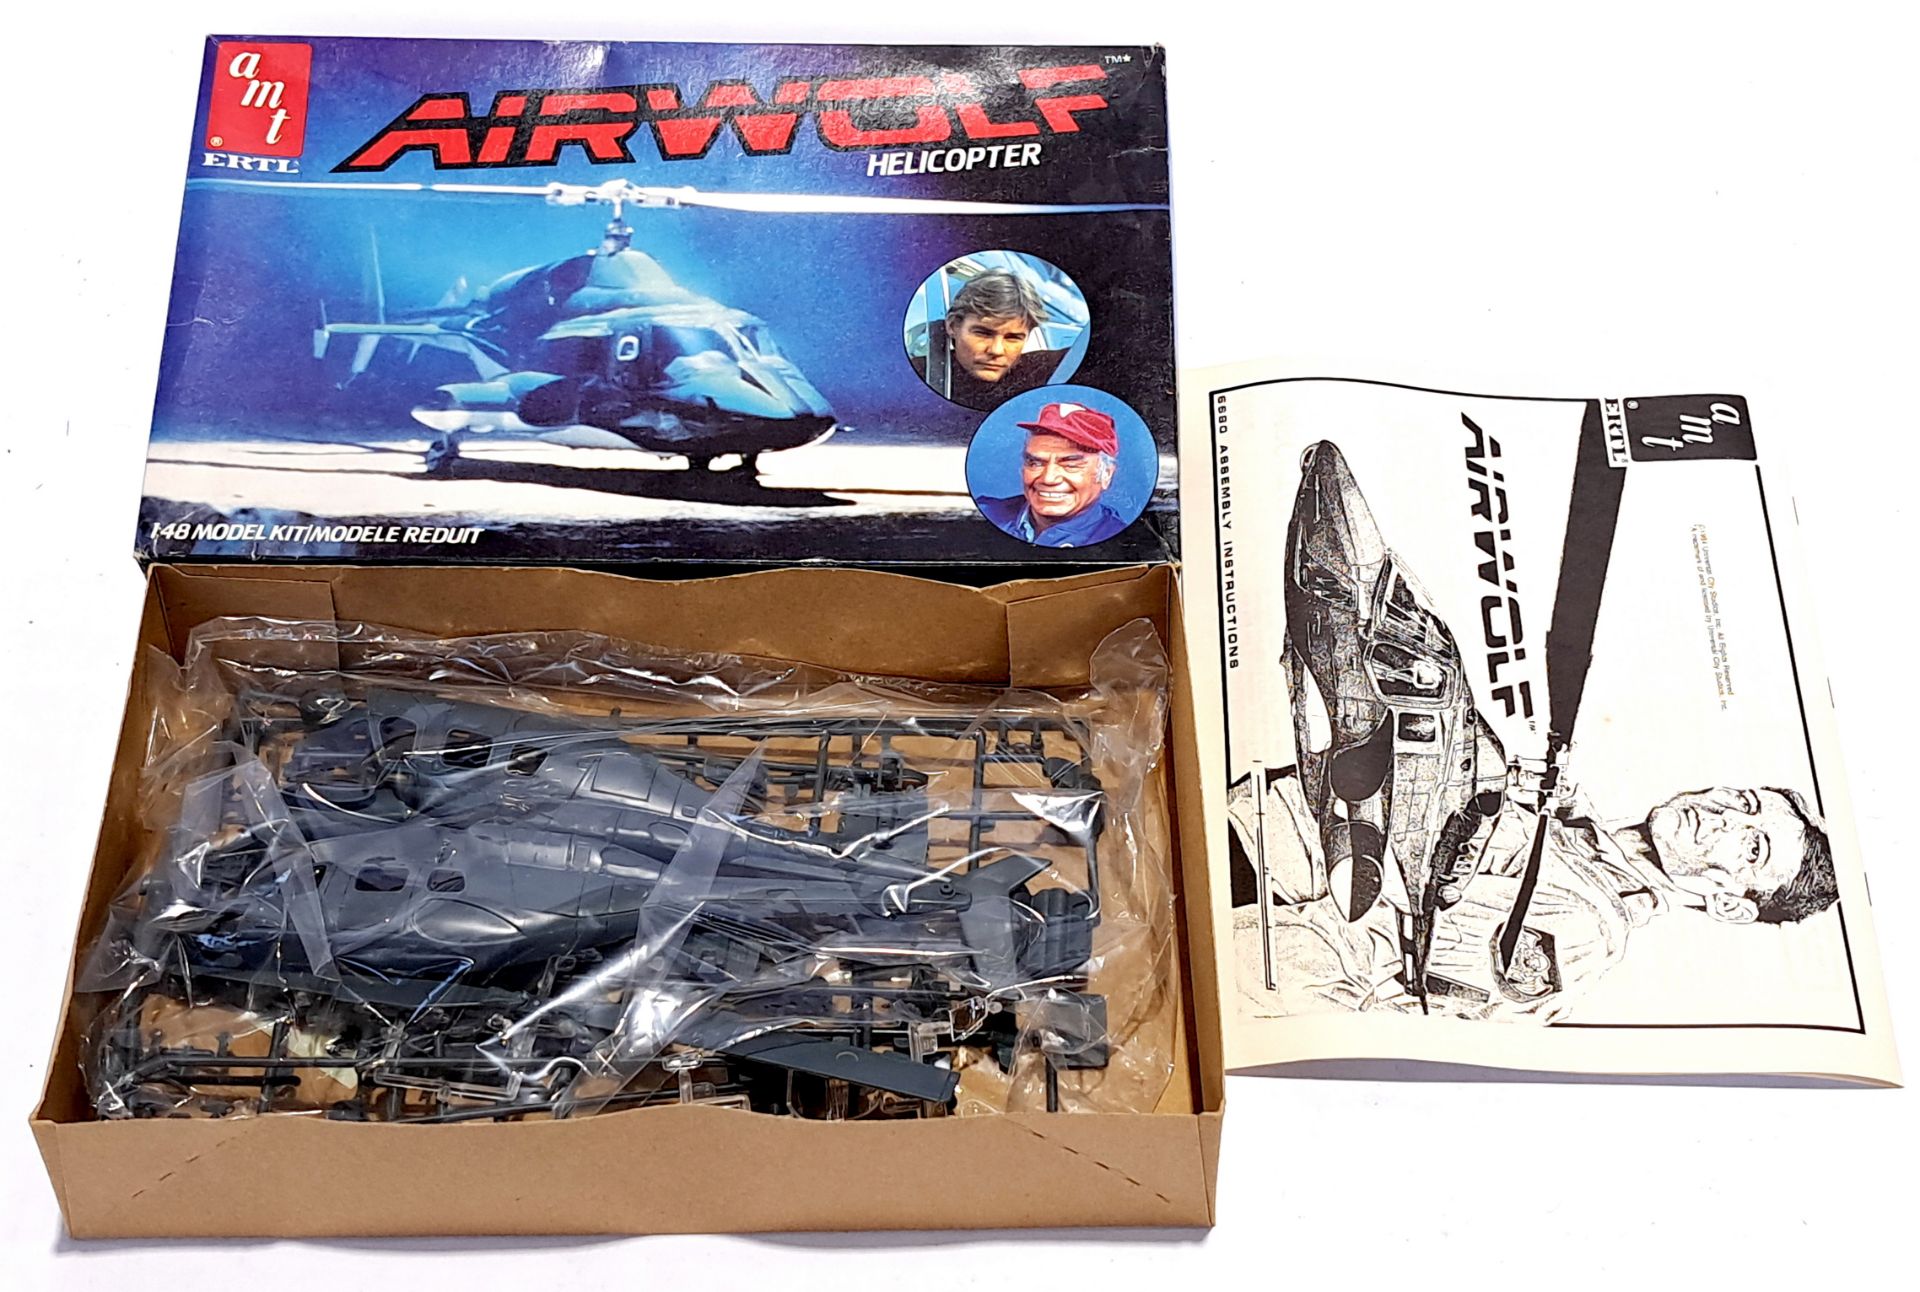 AMT ERTL 1:43 Airwolf Helicopter unmade plastic model kit 